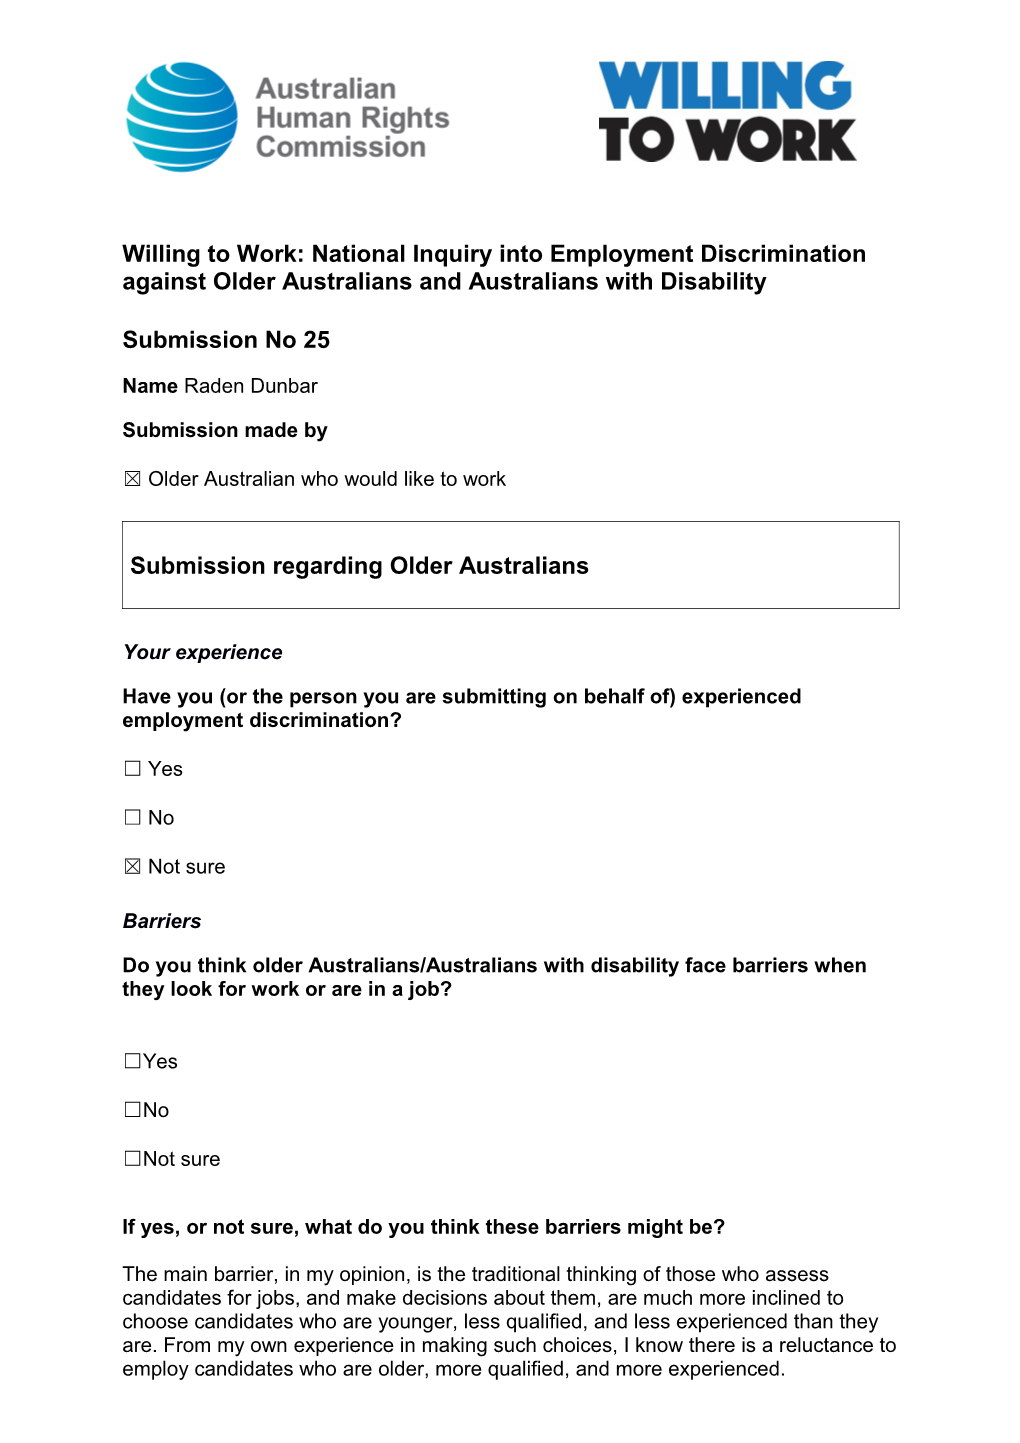 Willing to Work: National Inquiry Into Employment Discrimination Against Older Australians s5